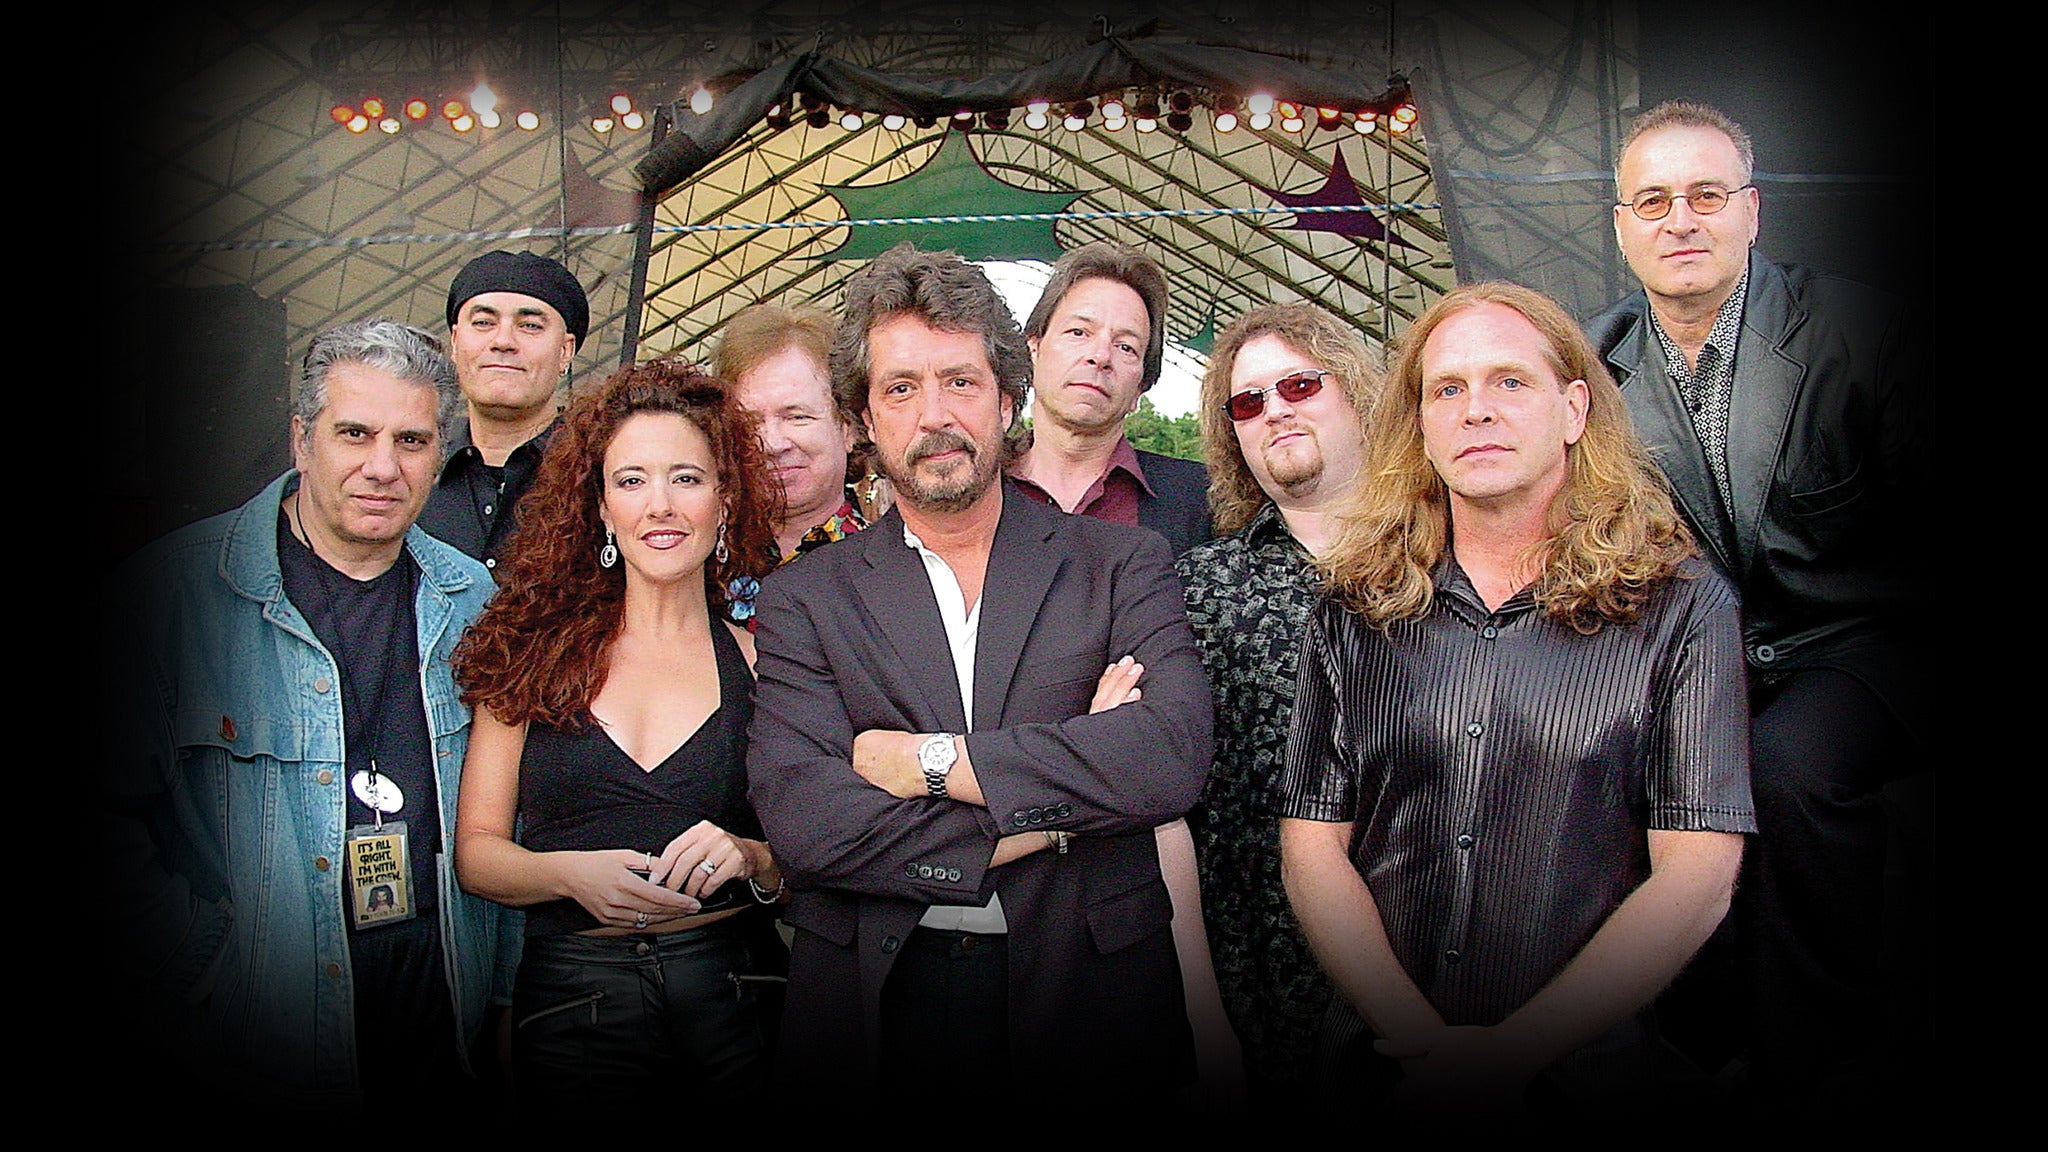 Michael Stanley and the Resonators in Lorain promo photo for Official Platinum presale offer code